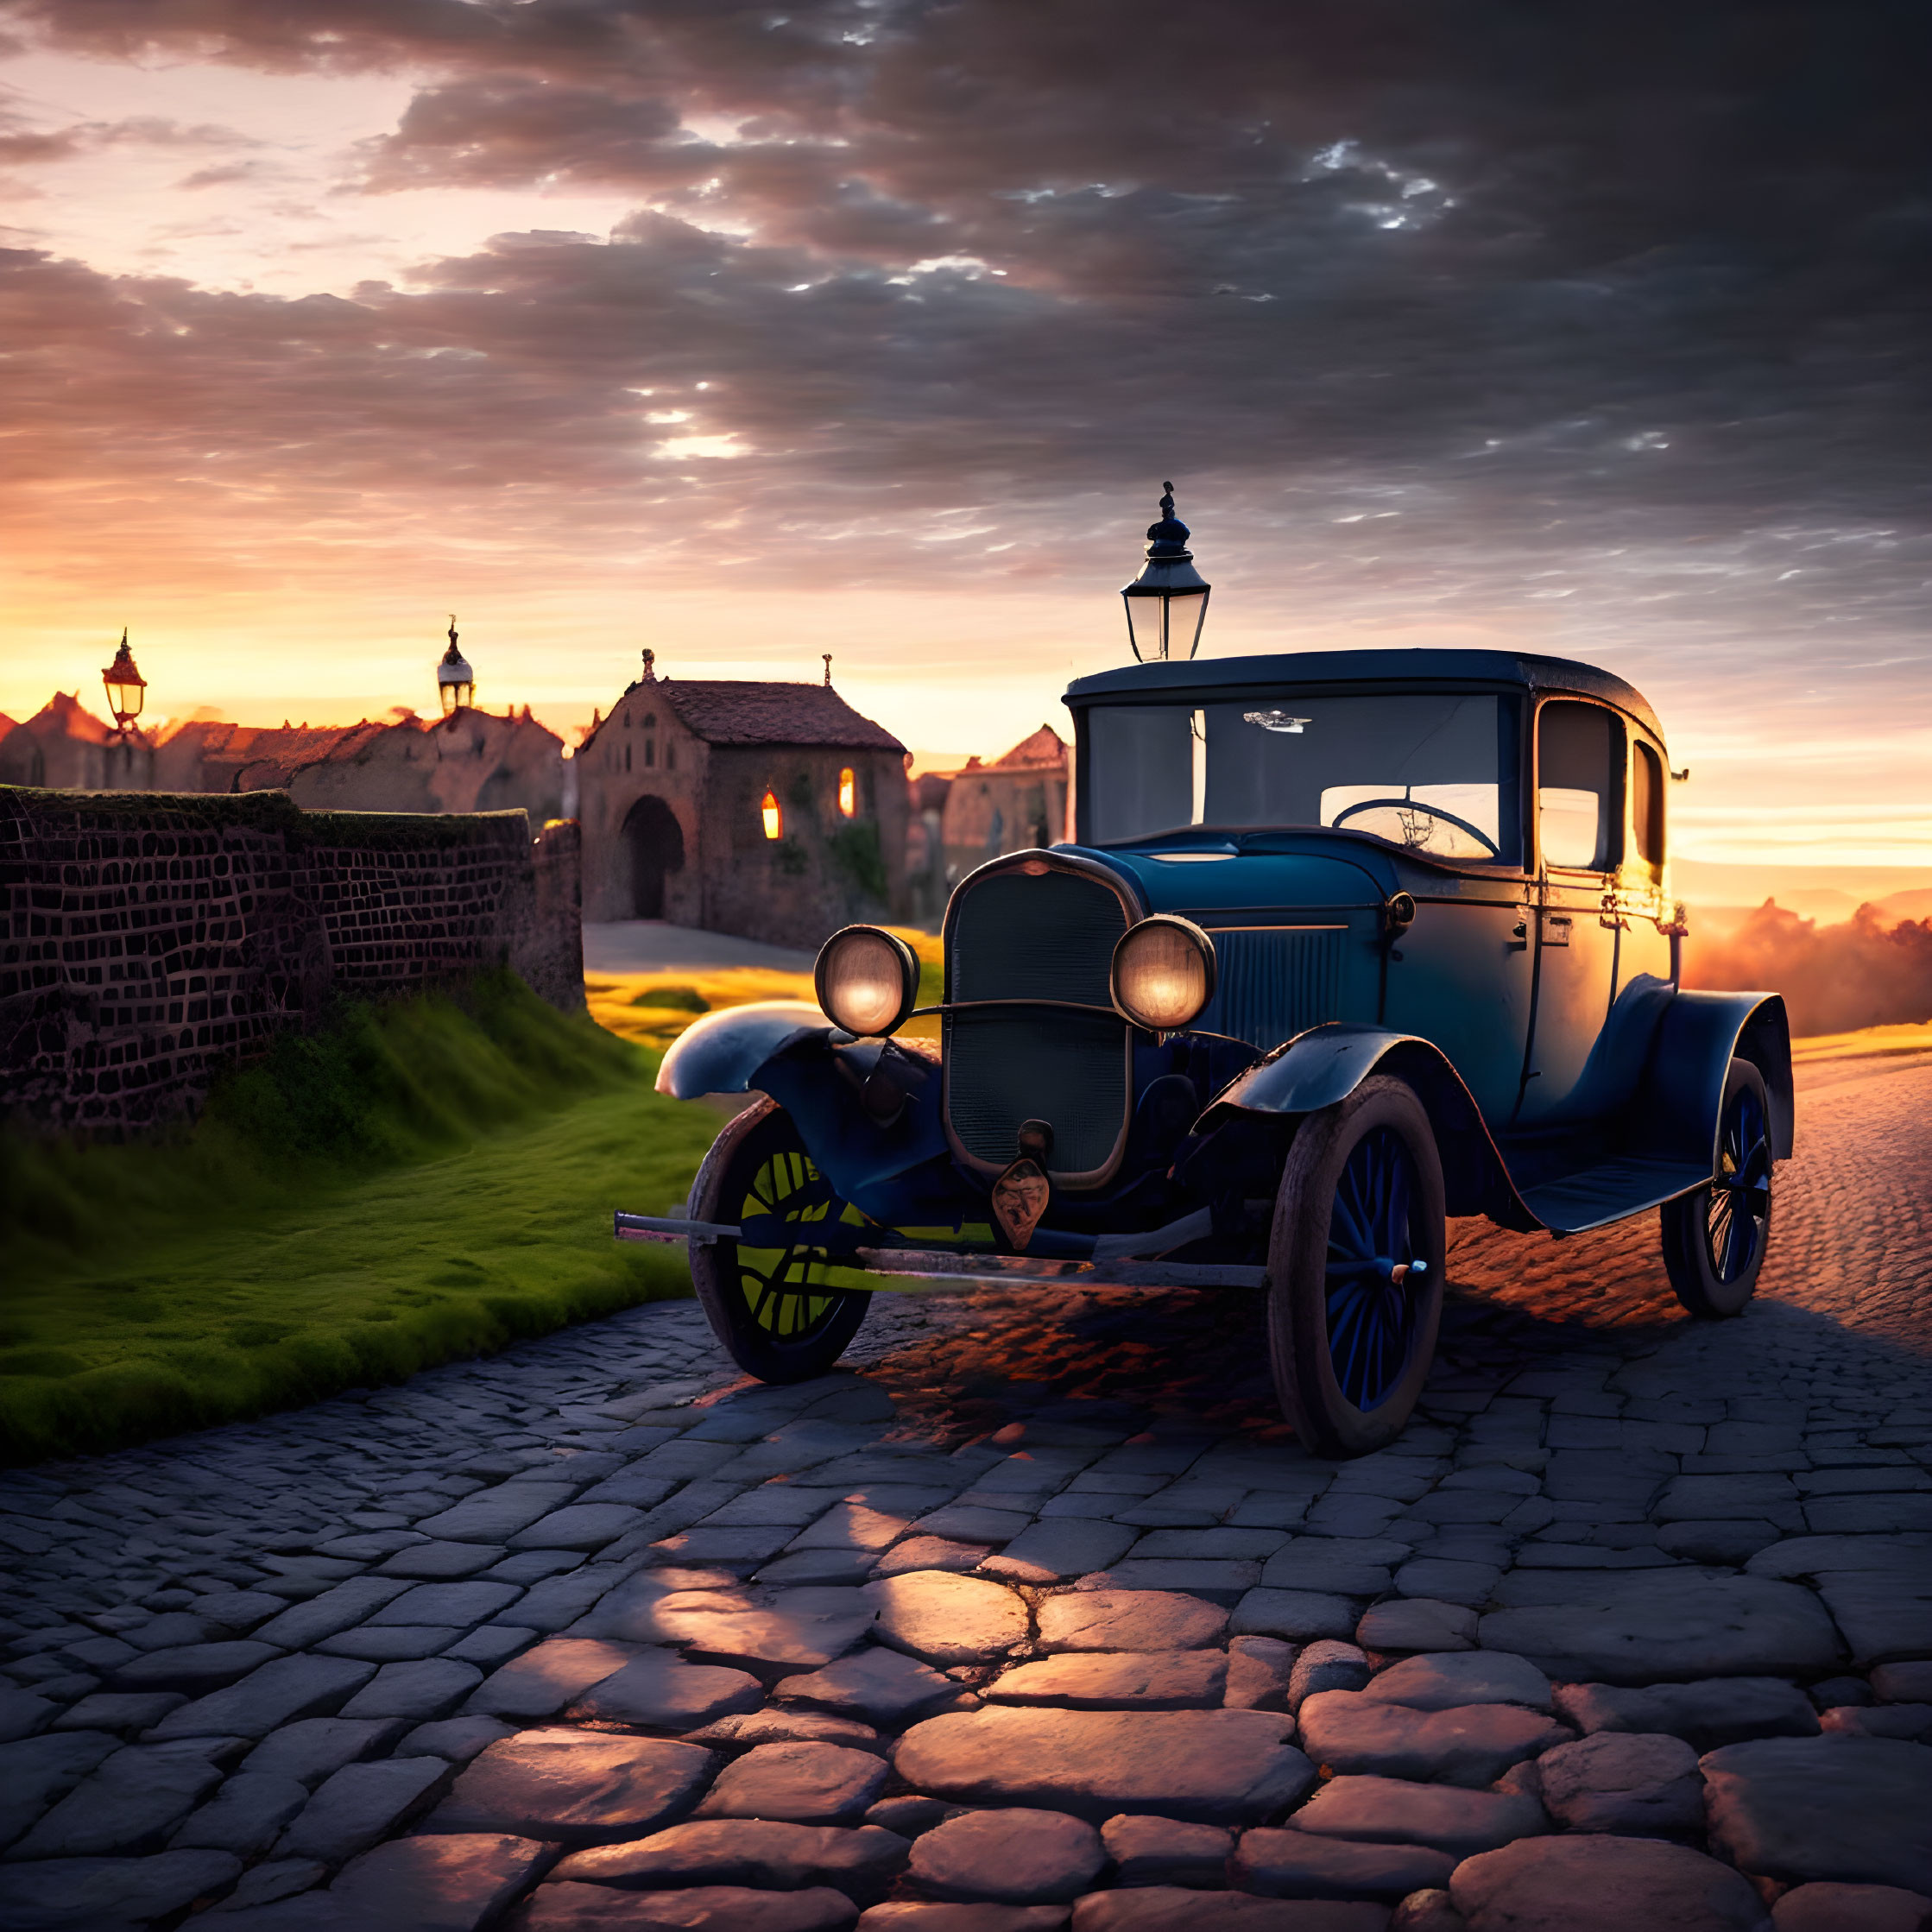 Classic Blue Car Parked on Cobblestone Road at Dusk